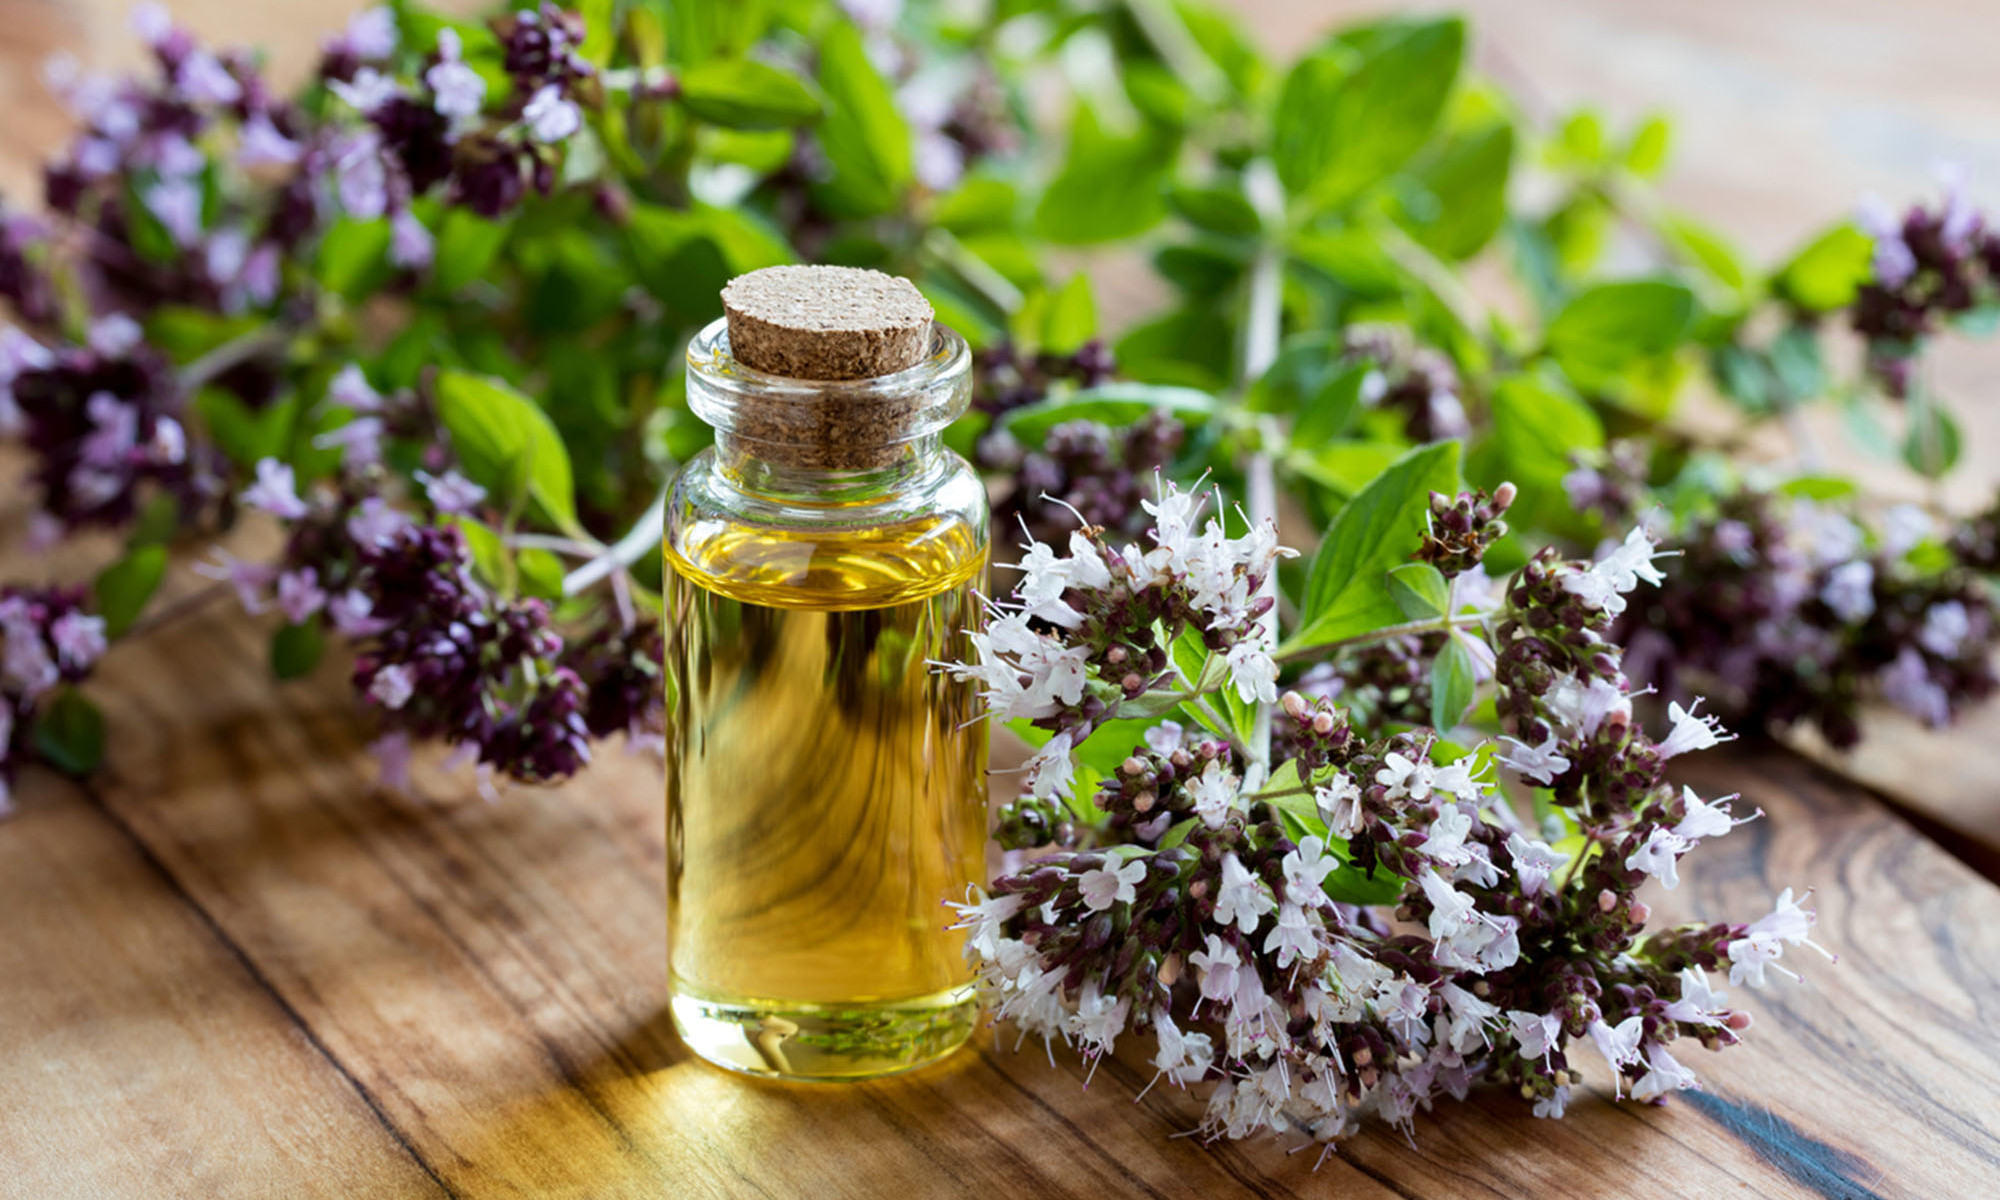 5 Health Benefits Of Oregano Oil & How To Use It